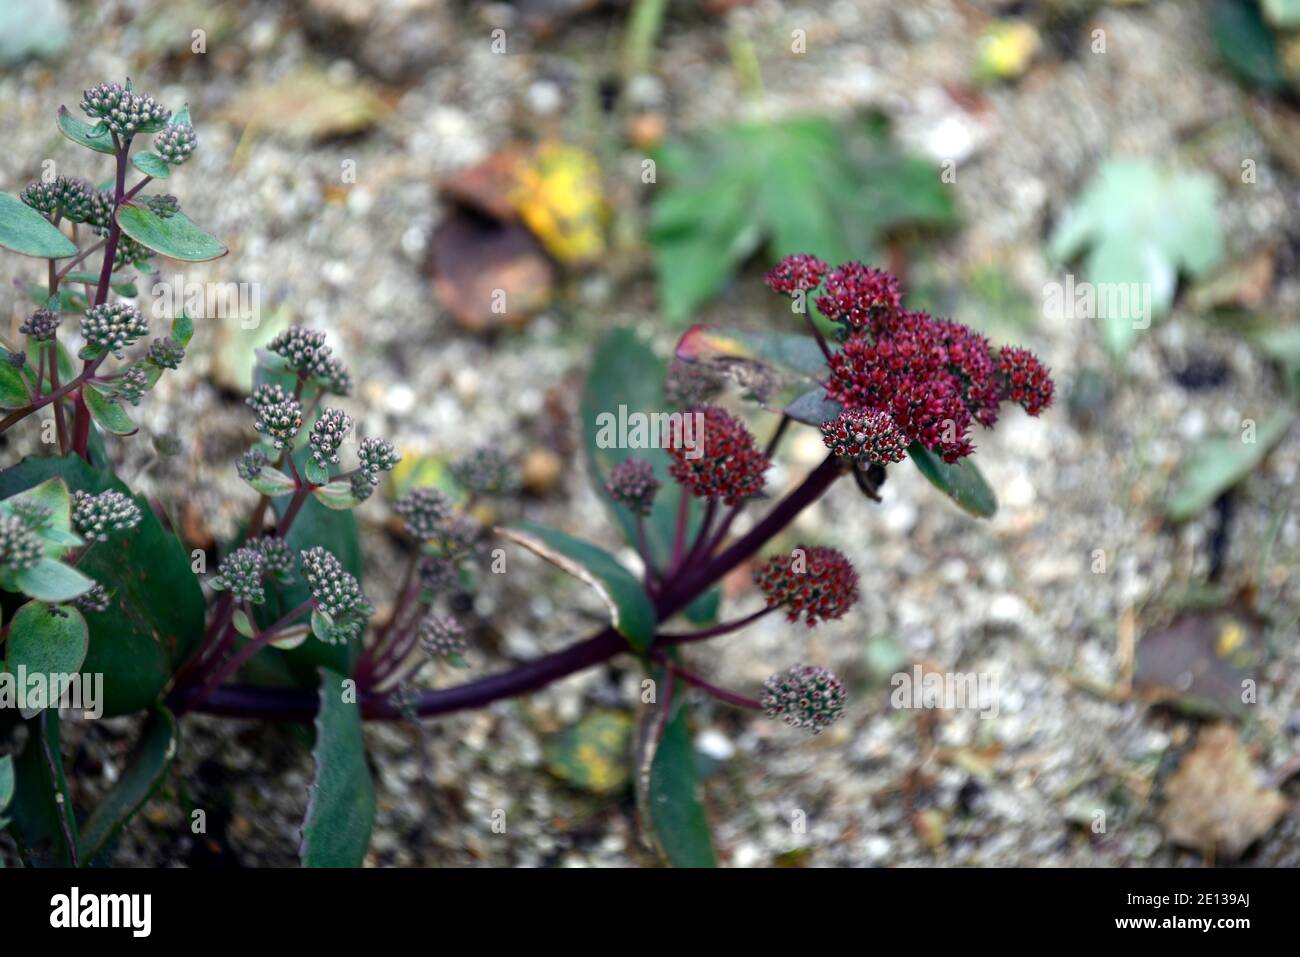 Hylotelephium Red Cauli,stonecrop Red Cauli,Sedum telephium Red Cauli,Sedum Red Cauli,succulent perennials,succulents,red flowers,flowering,RM Floral Stock Photo